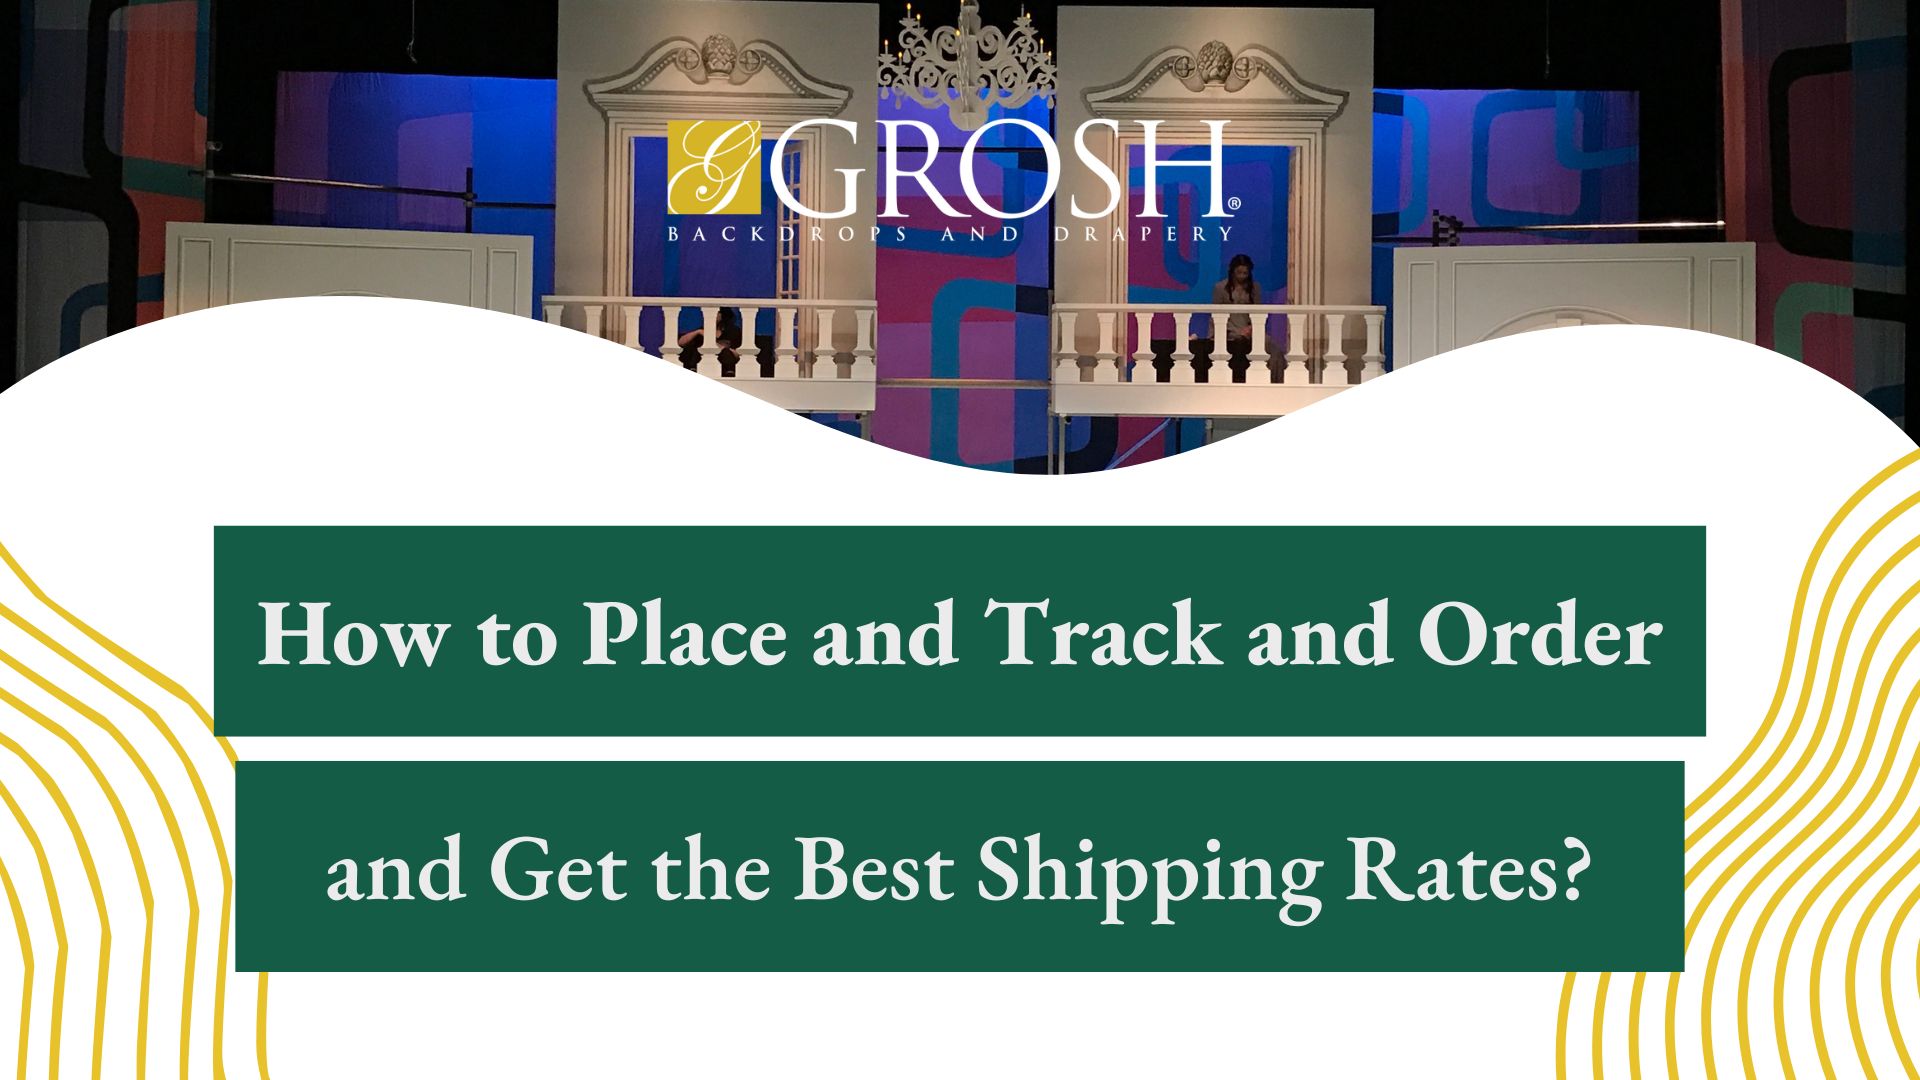 How to Place and Track and Order and Get the Best Shipping Rates